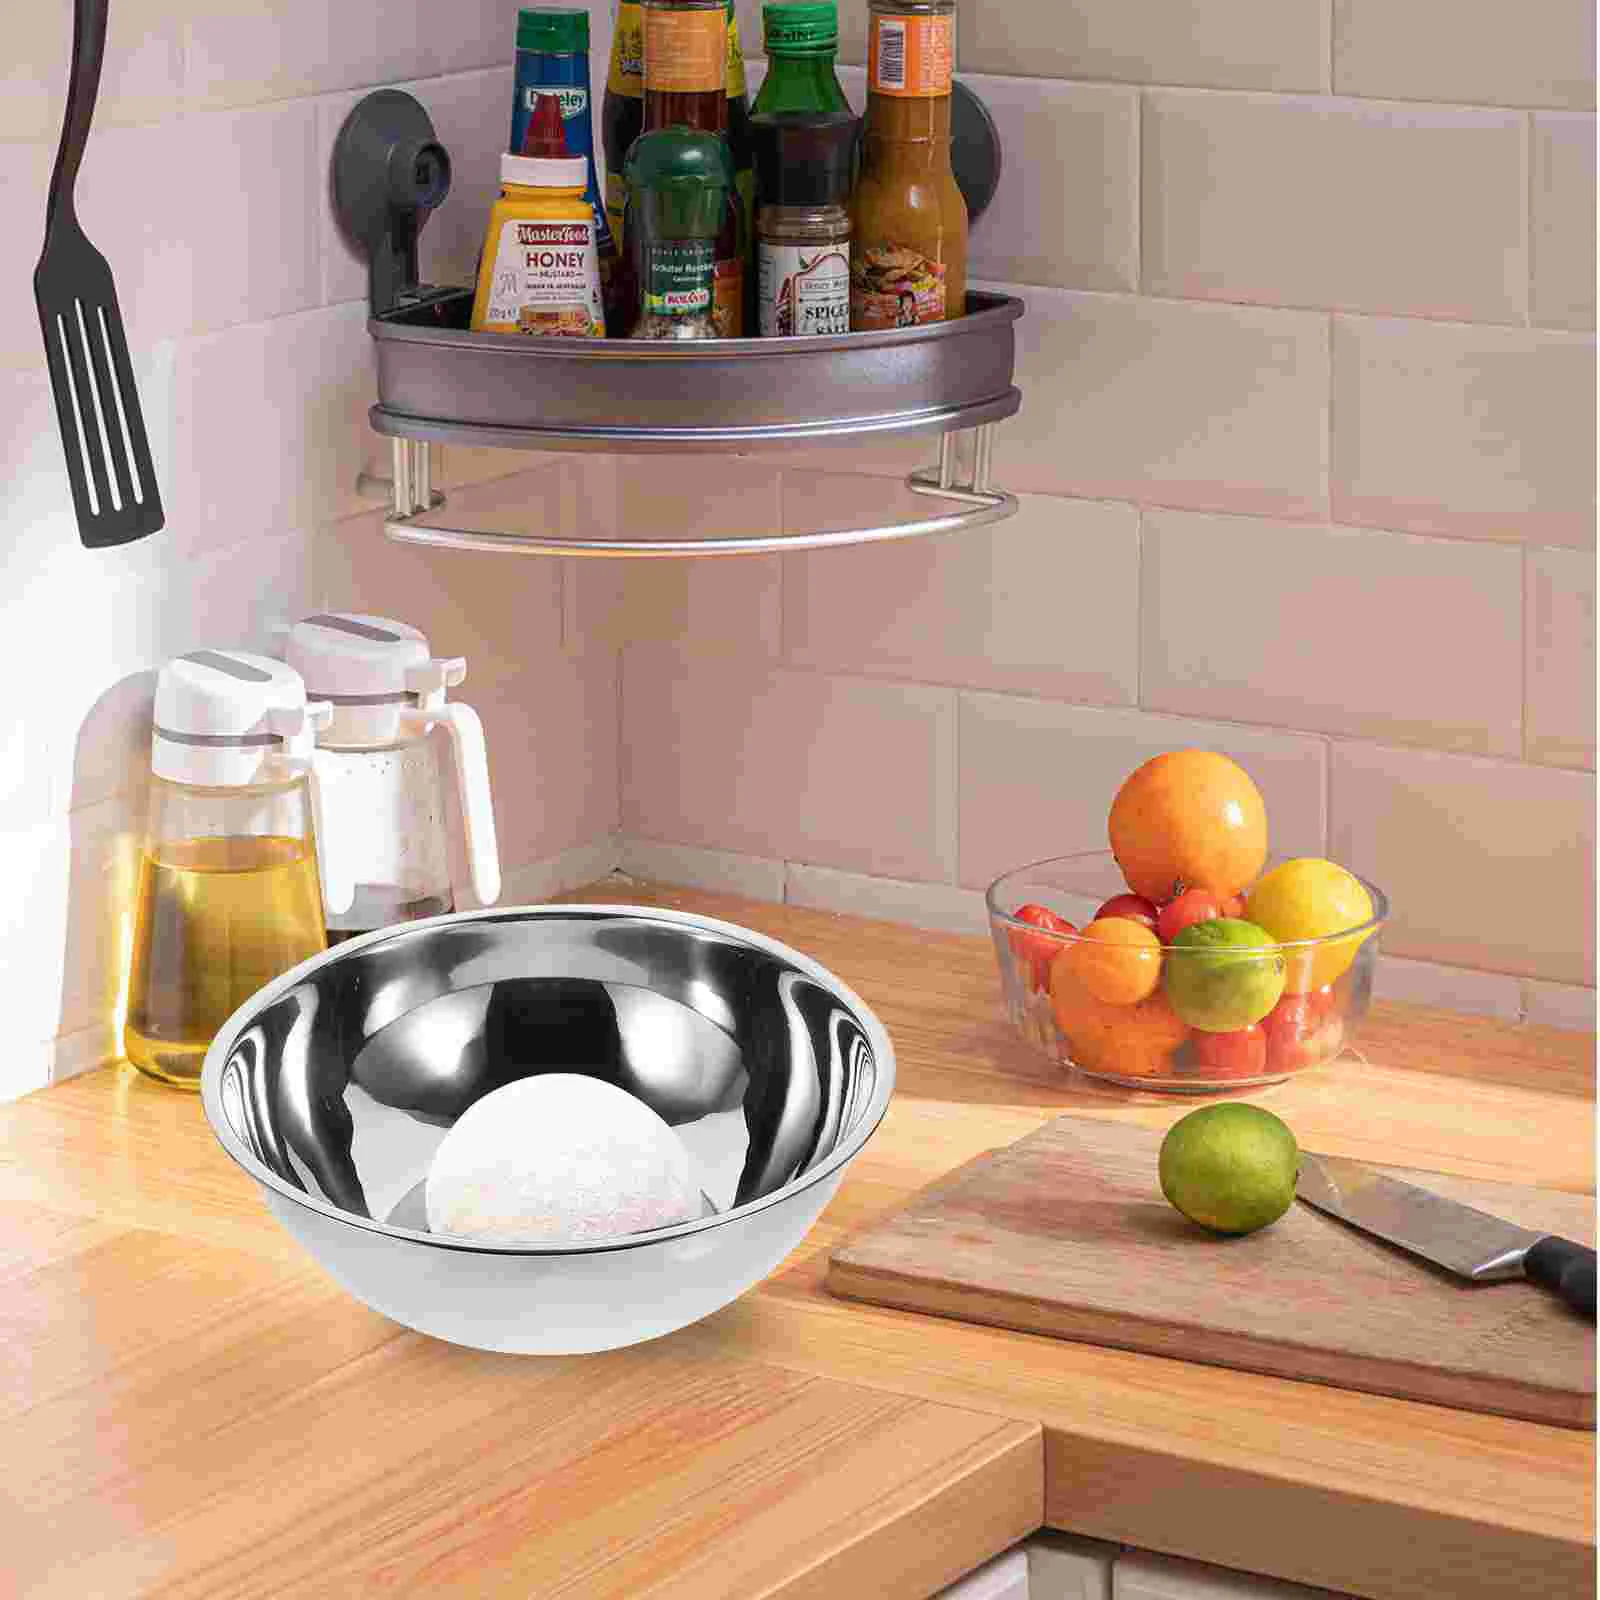 https://ae01.alicdn.com/kf/S2e2f3923ac7c4ada901ab08d021b7337S/Metal-Mixing-Bowl-Stainless-Steel-Kitchen-Accessory-Large-Bowls-Home-Basin-Vegetable-Wash.jpg